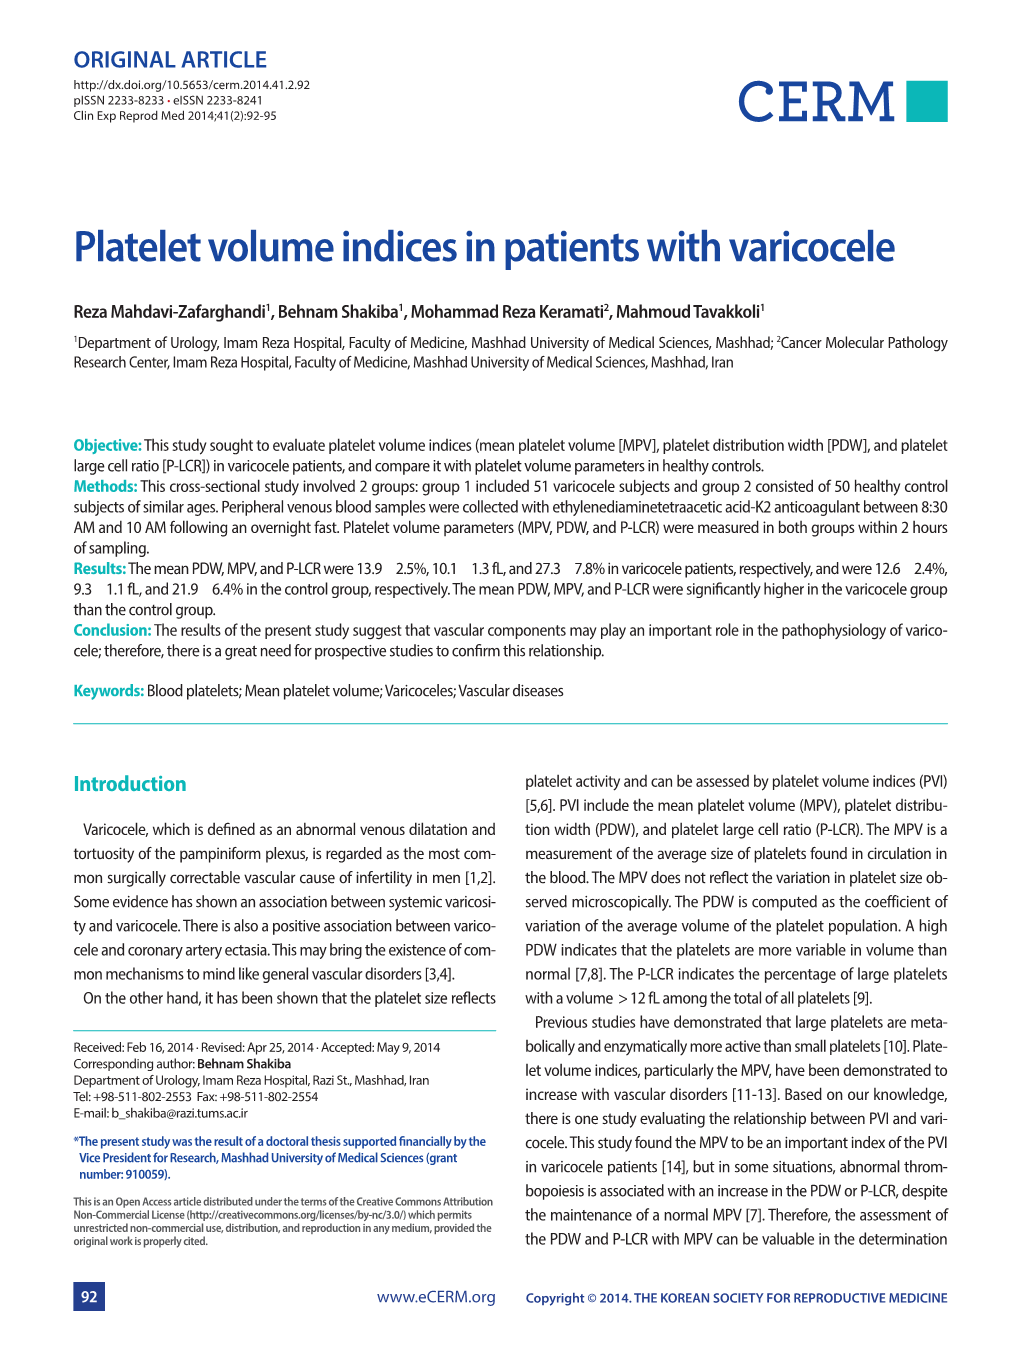 Platelet Volume Indices in Patients with Varicocele